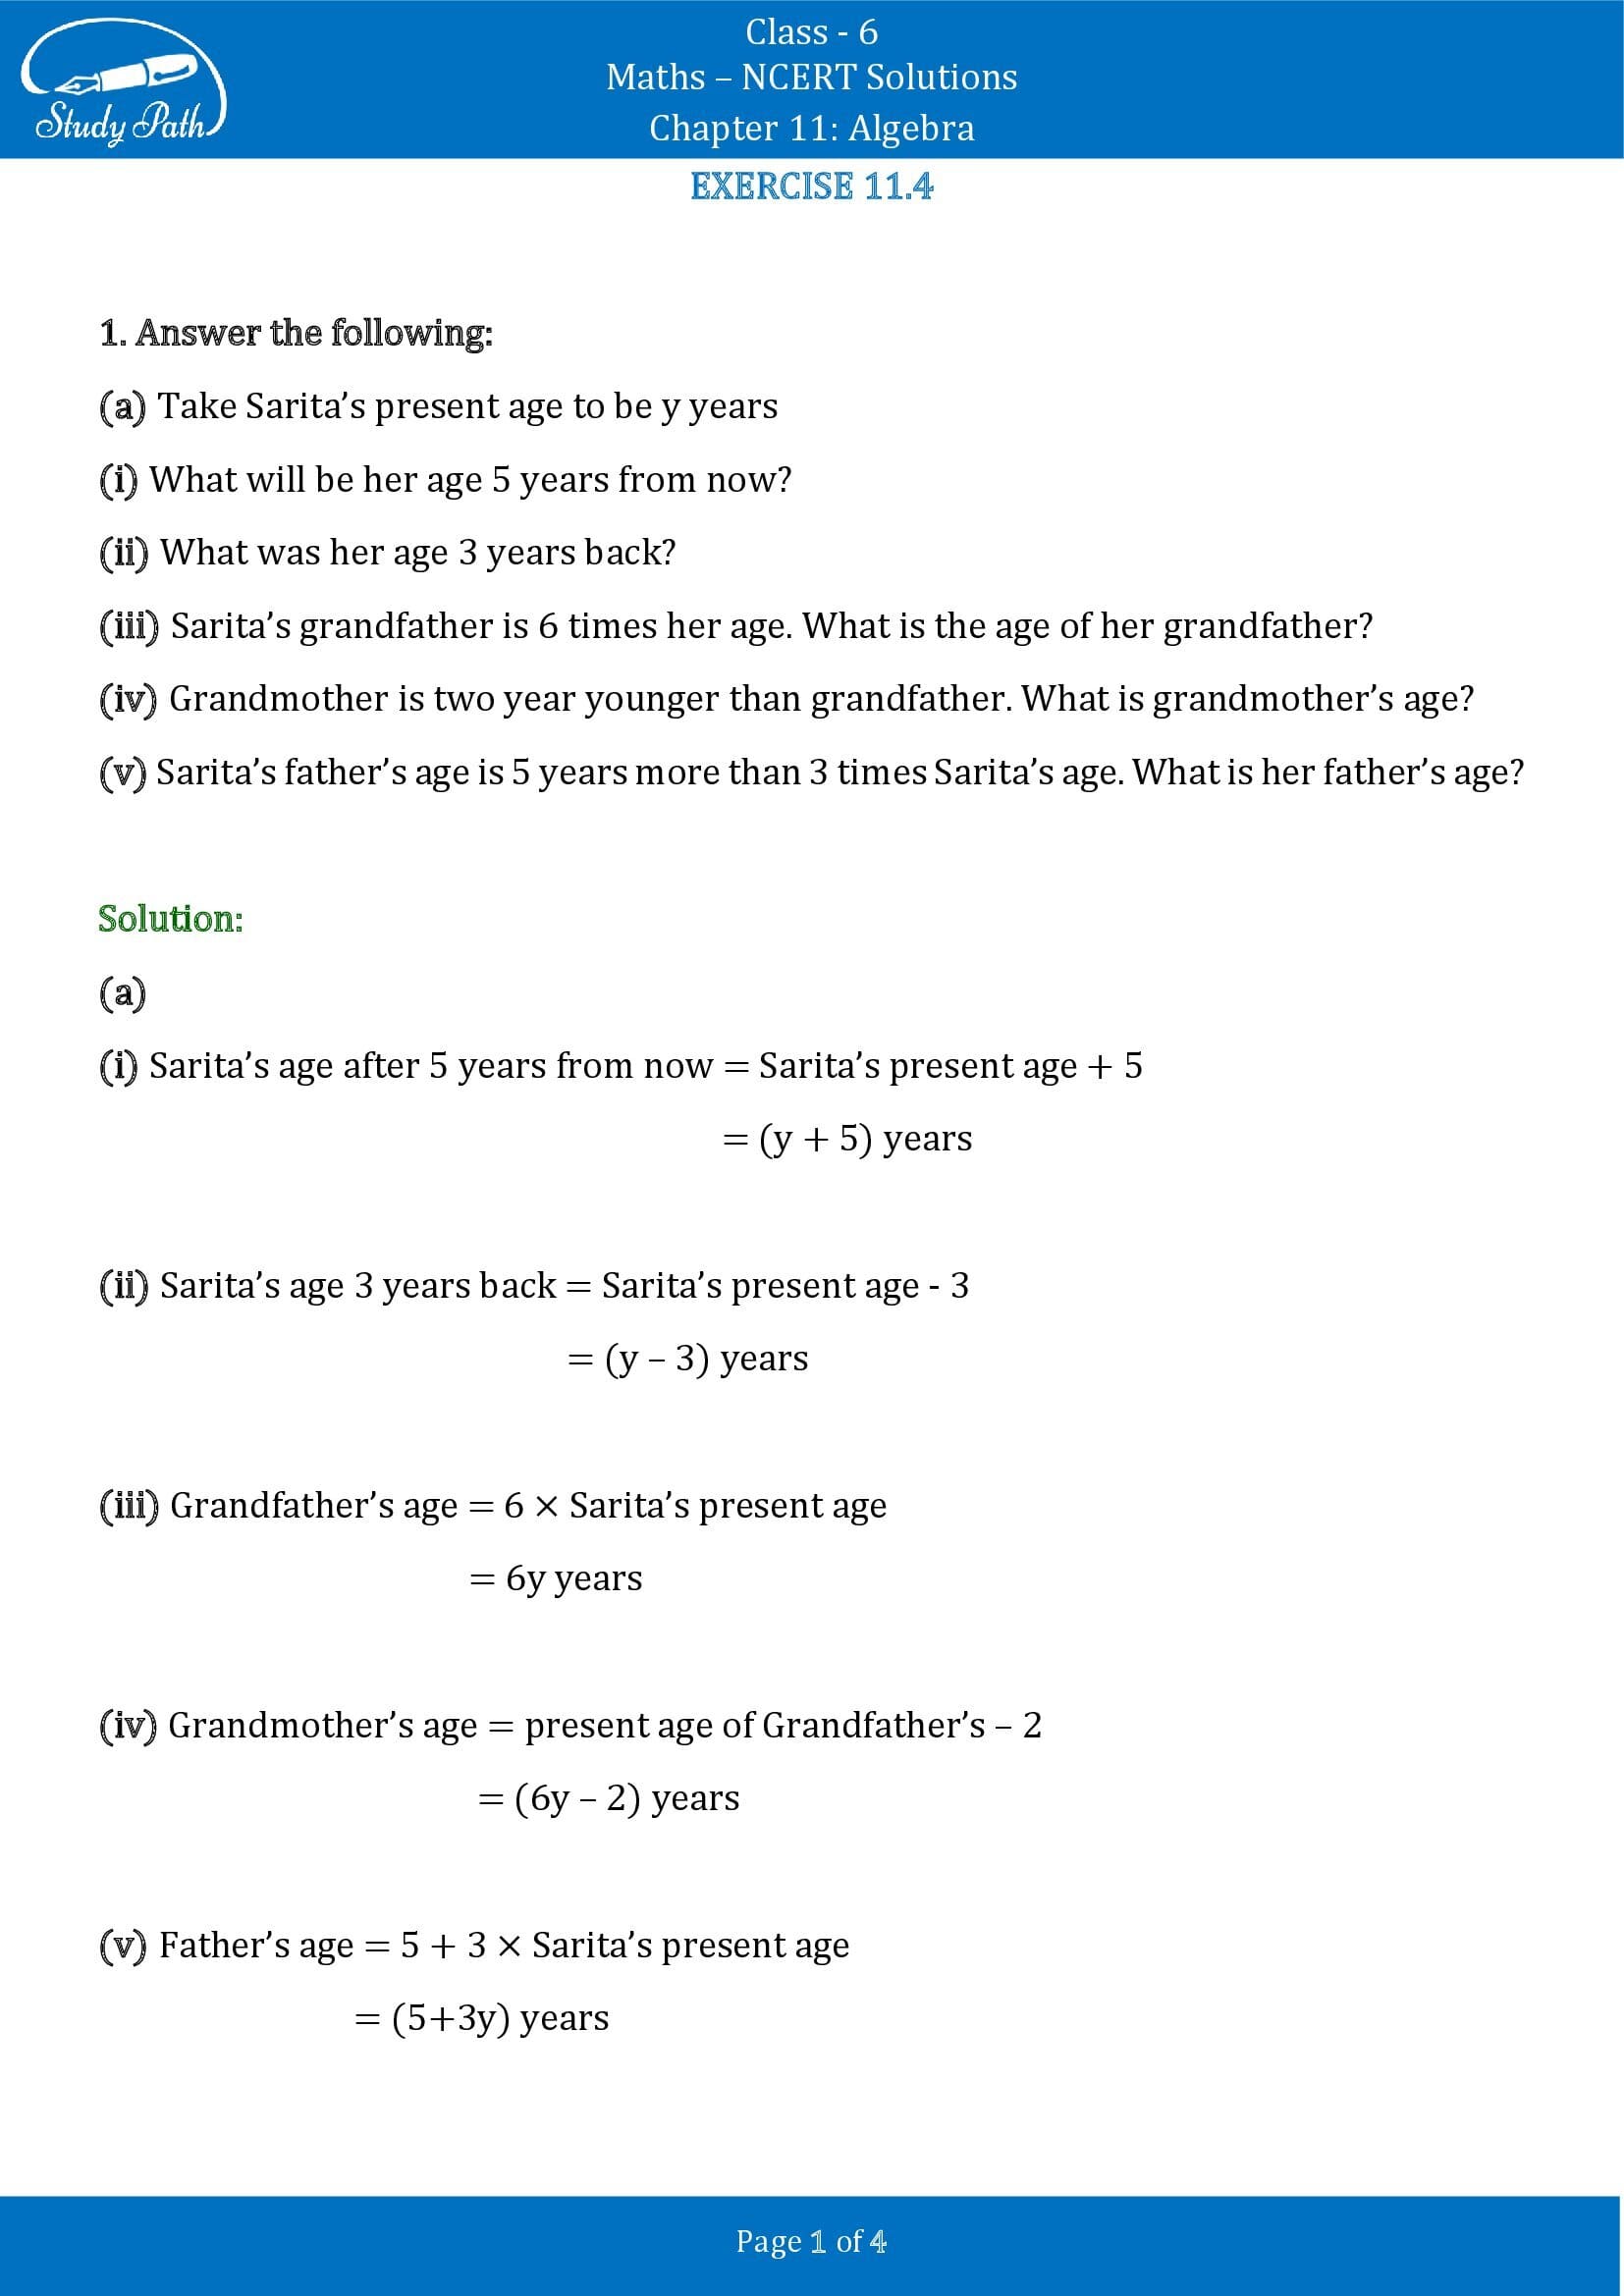 NCERT Solutions for Class 6 Maths Chapter 11 Algebra Exercise 11.4 00001